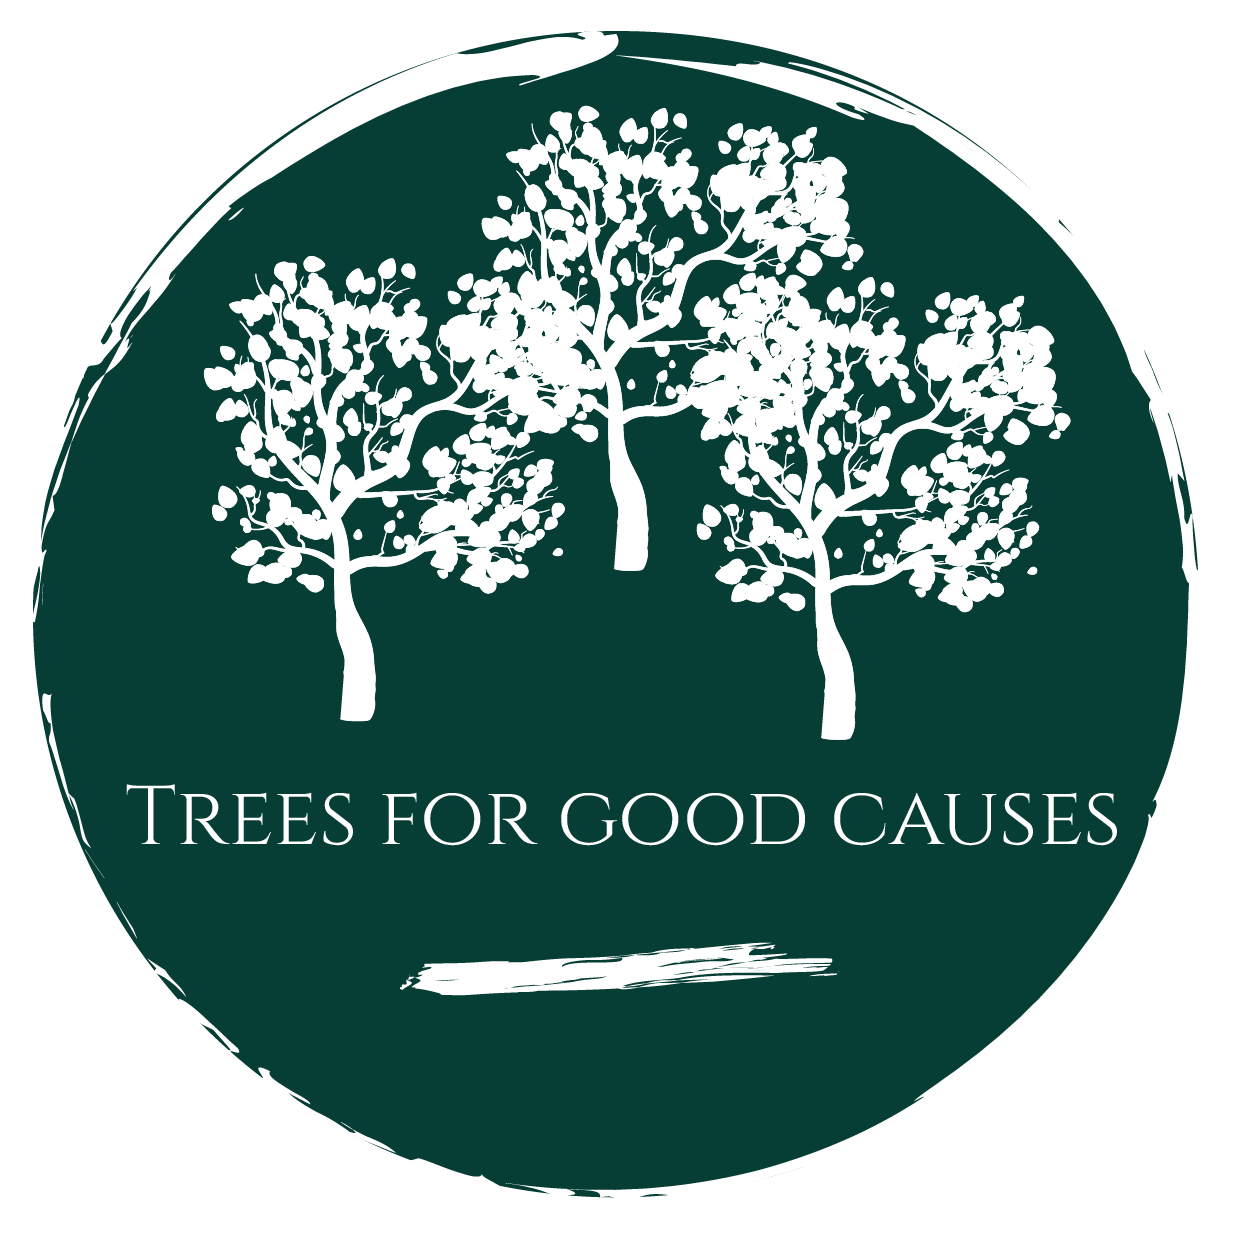 Trees for good causes